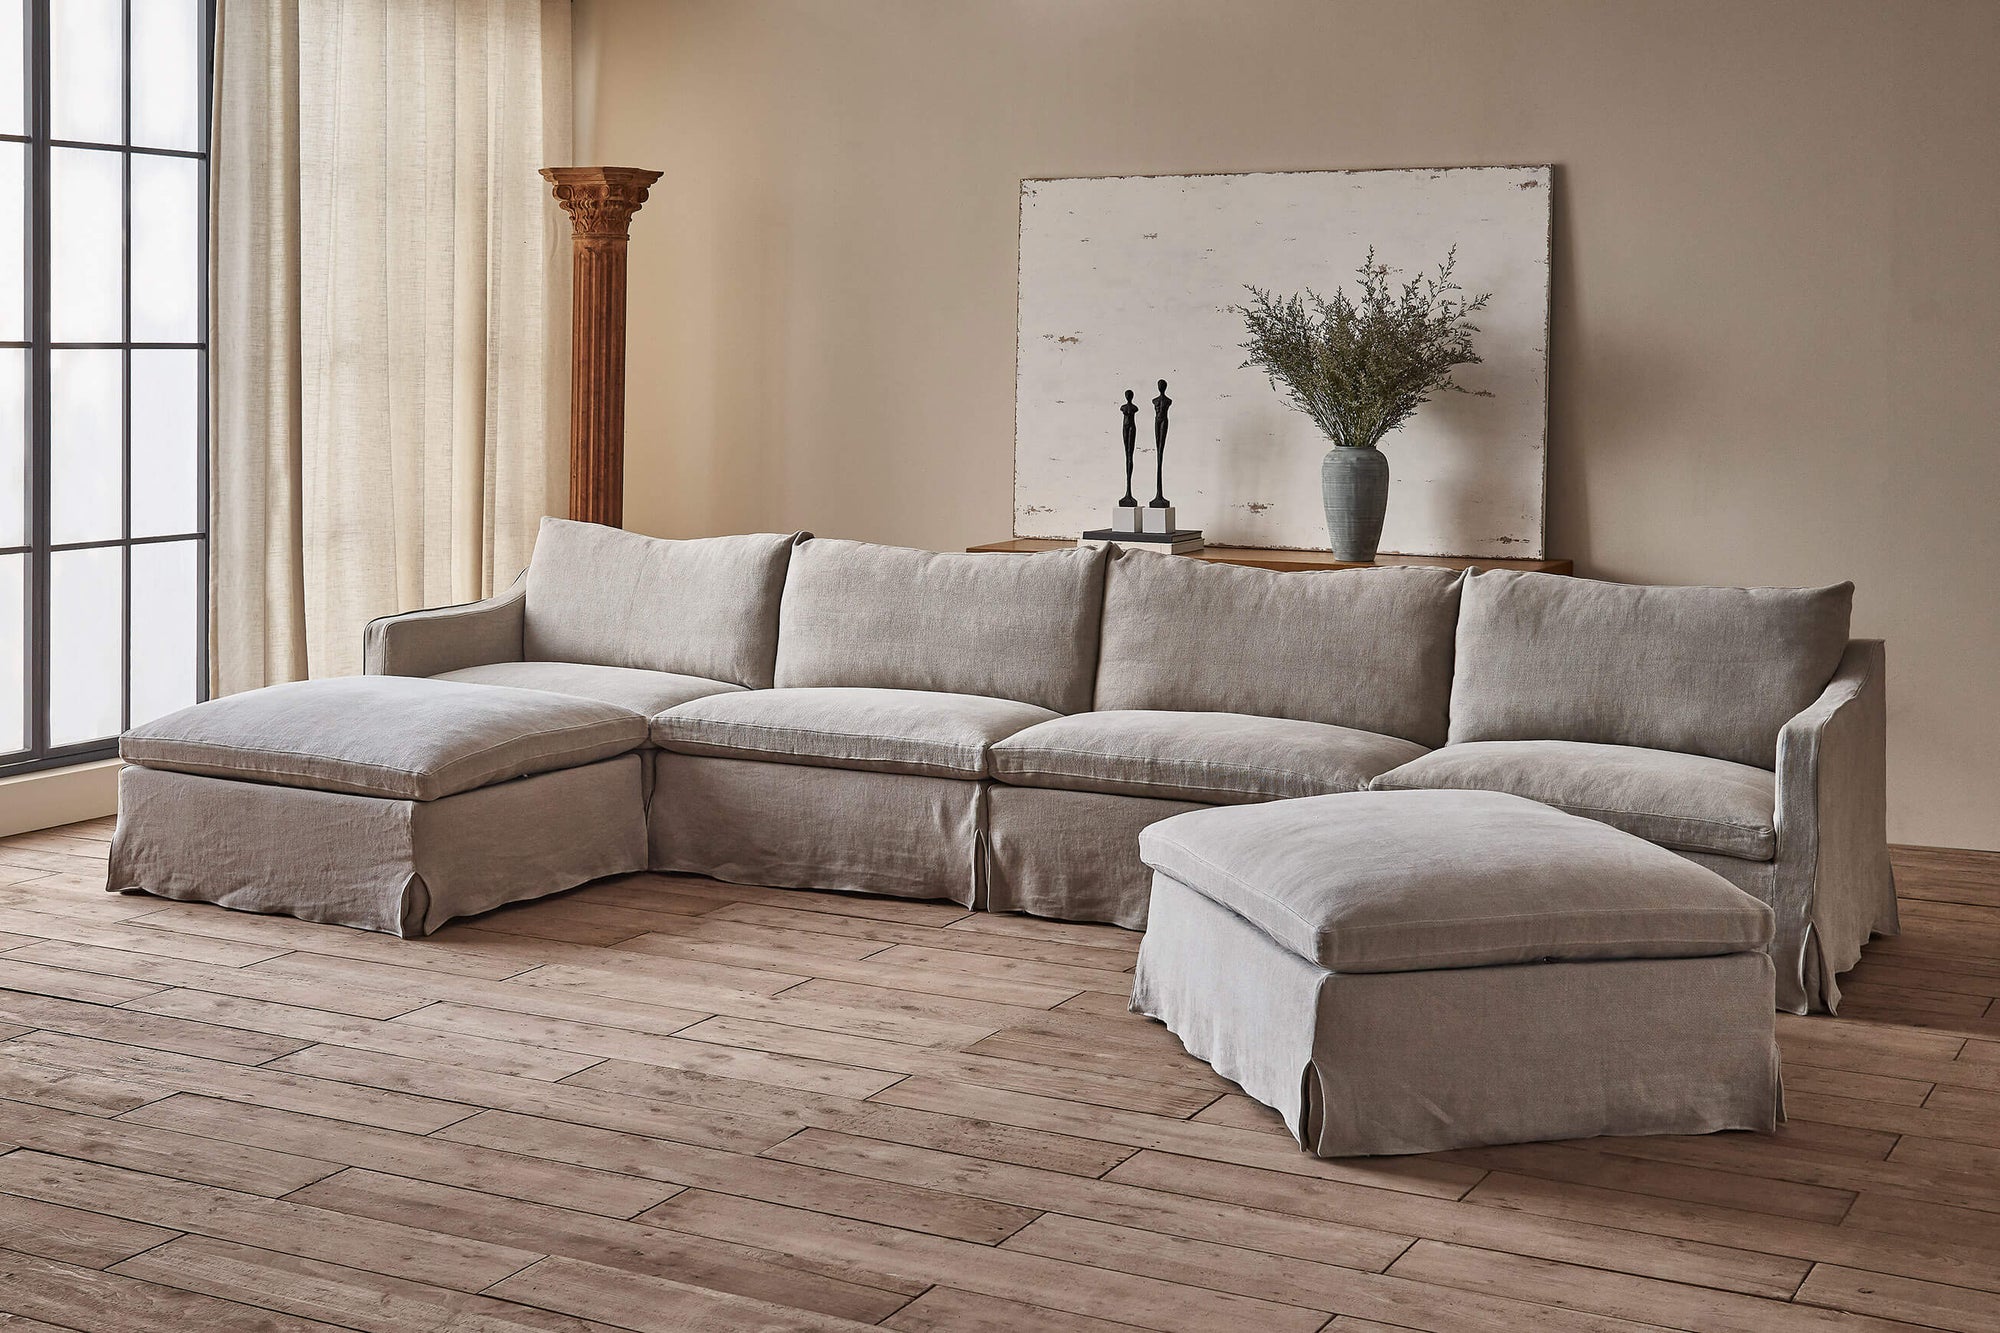 Amelia U-Shape Sectional Sofa in Jasmine Rice, a light warm greige Medium Weight Linen, placed in a sunlit room next to a window